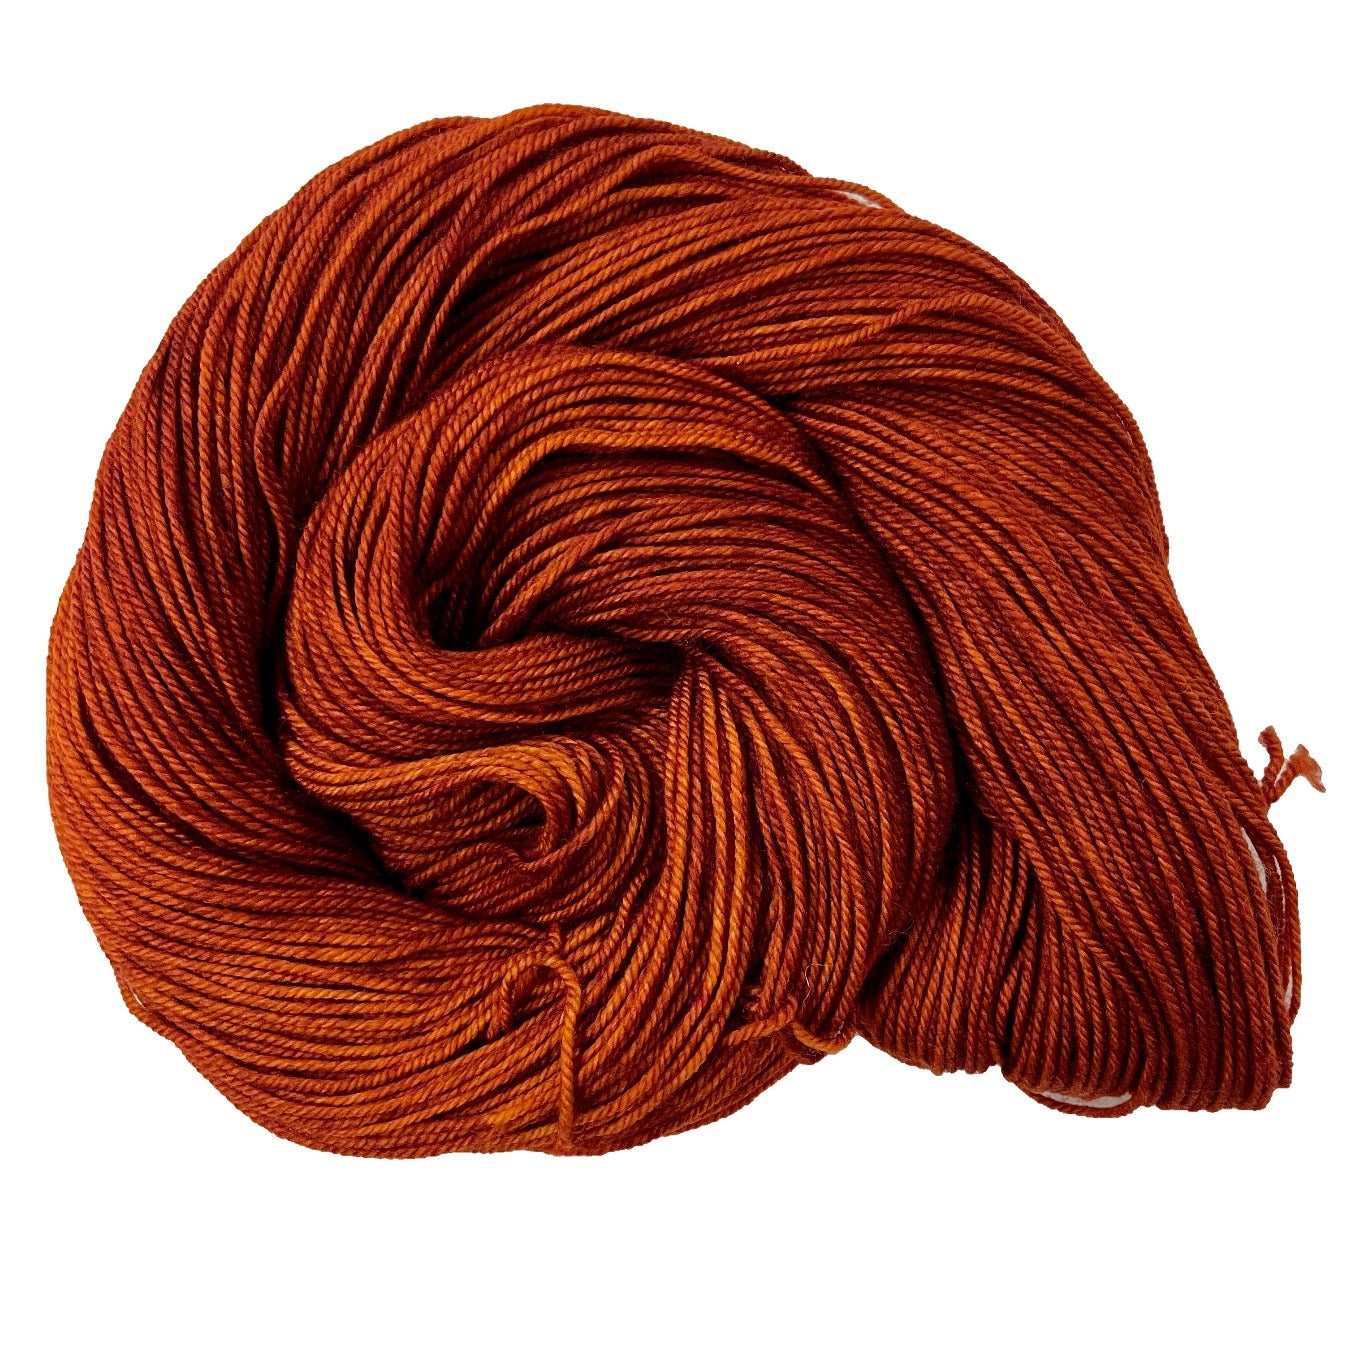 Photo of the Flaming Locks of Auburn Hair colorway by Knitted Wit Sport